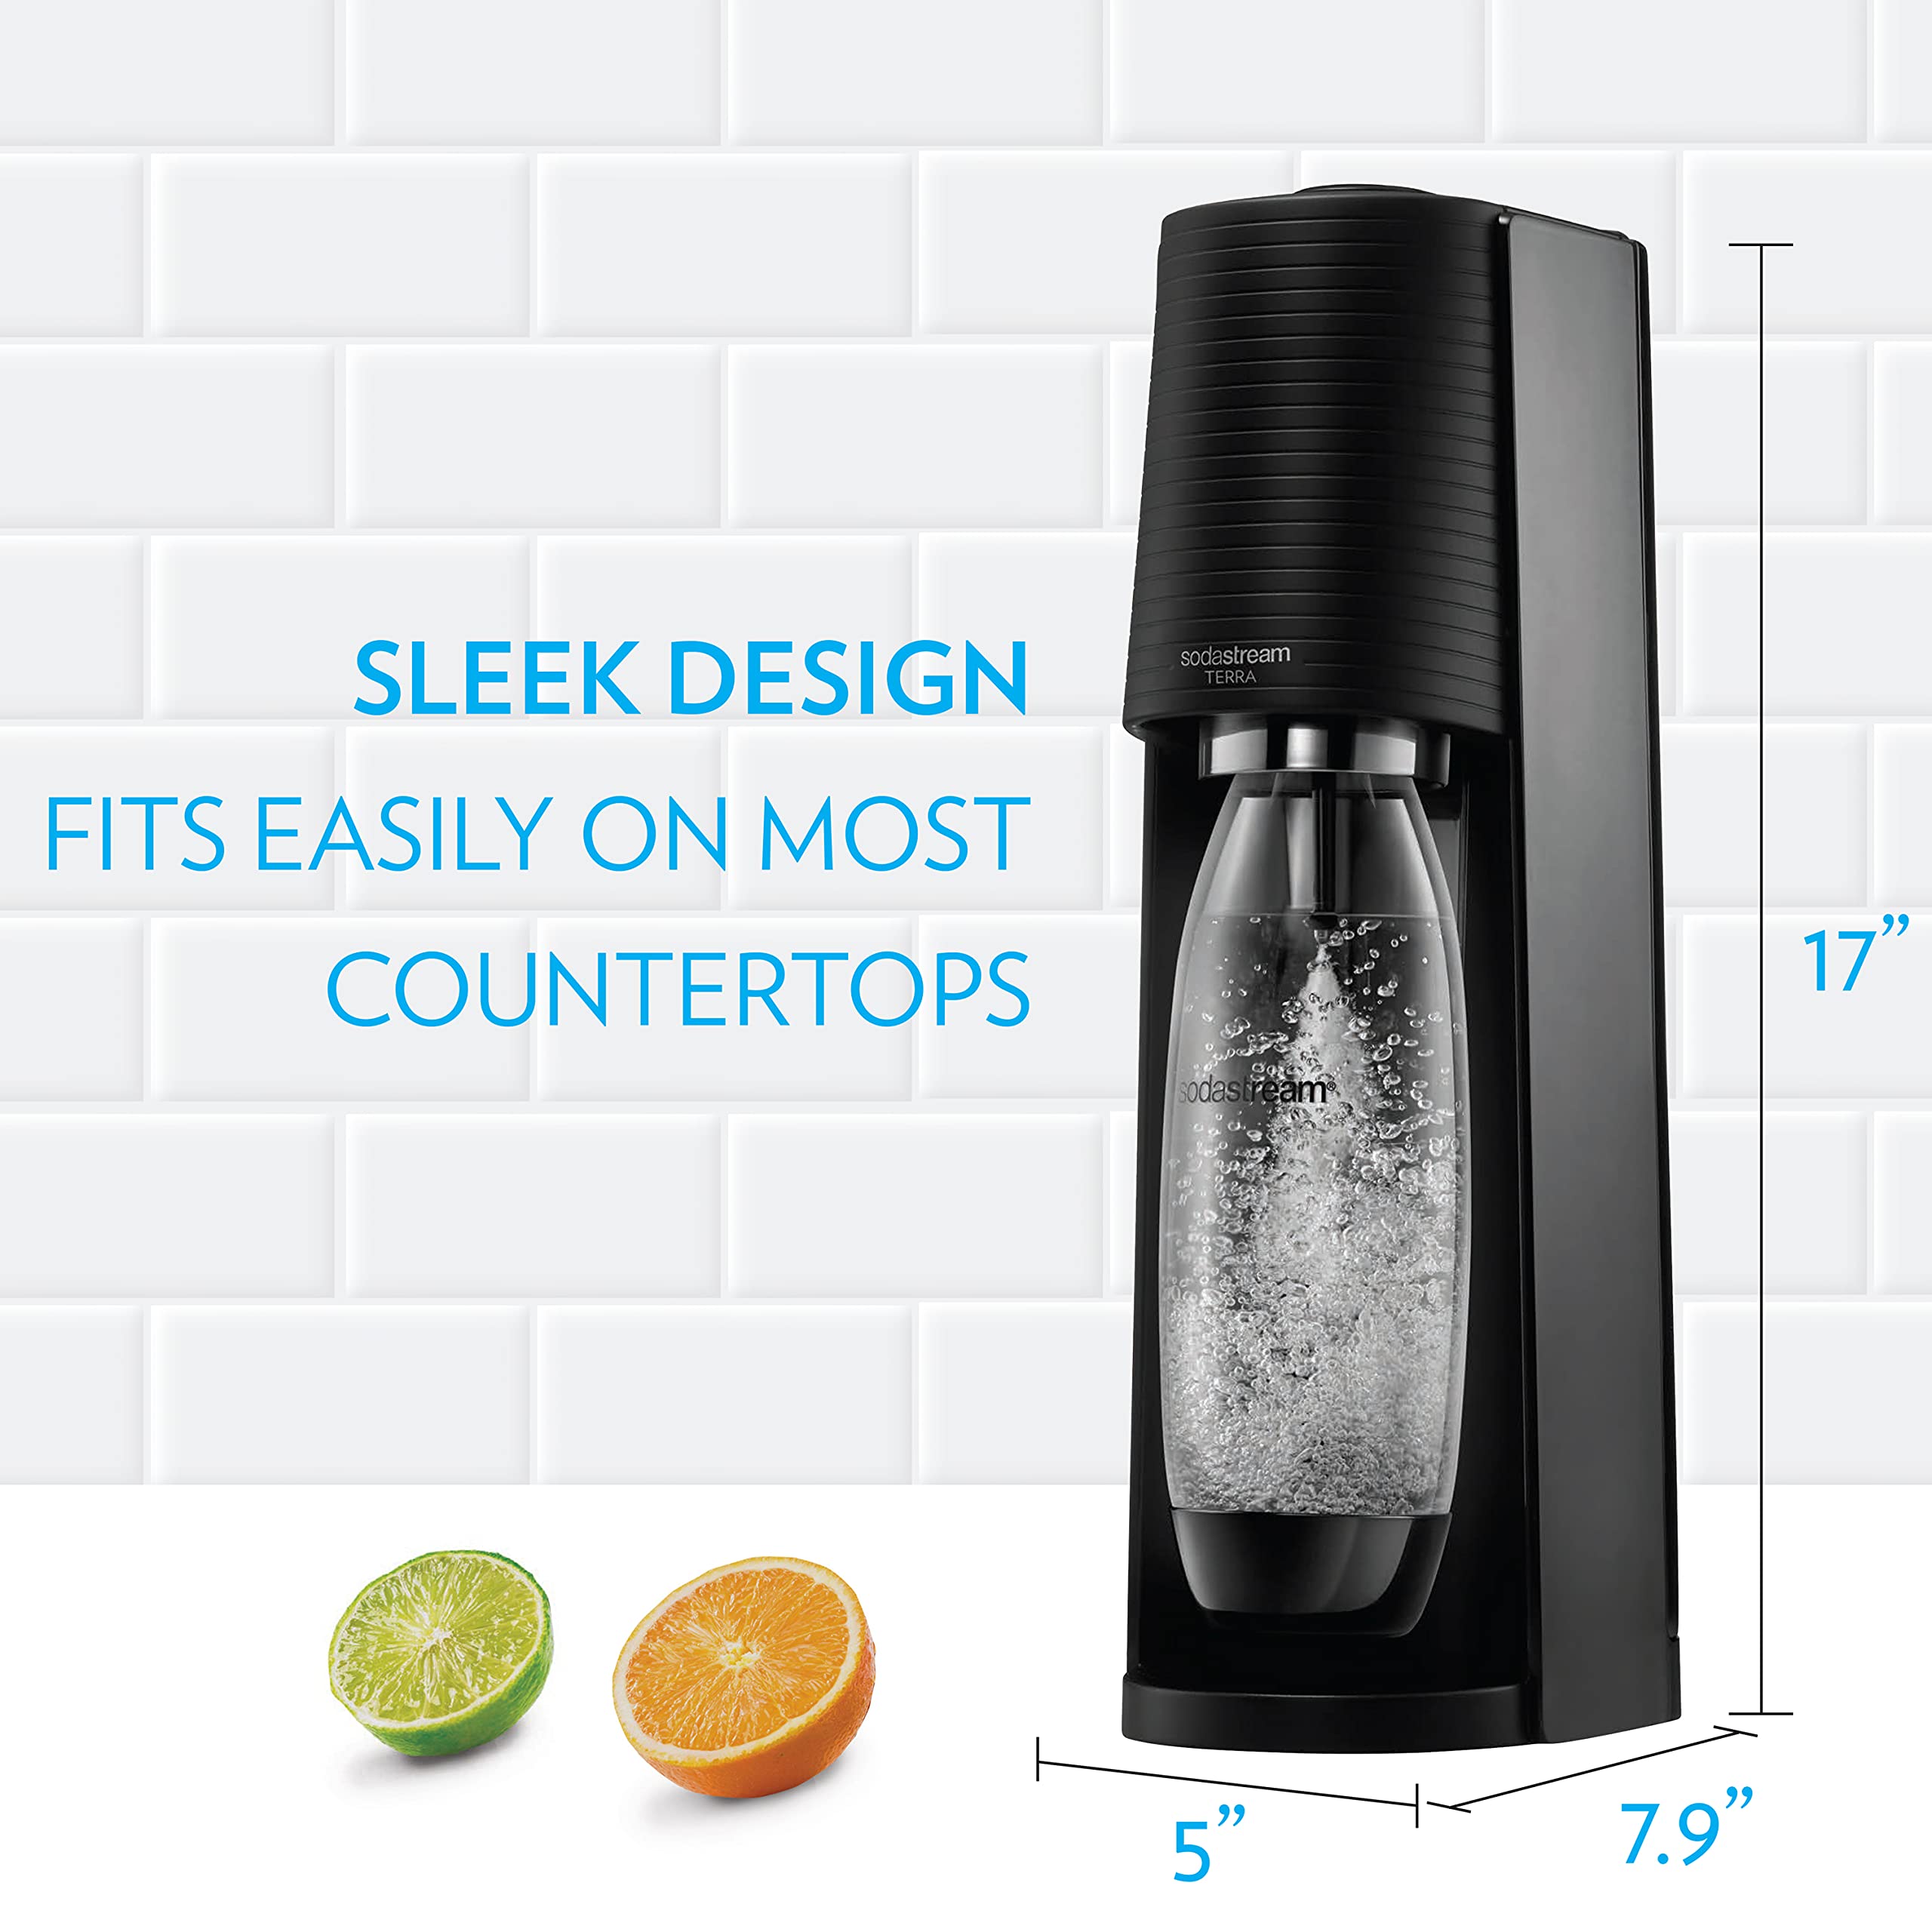 SodaStream Terra Sparkling Water Maker (Black) with CO2 and DWS Bottle